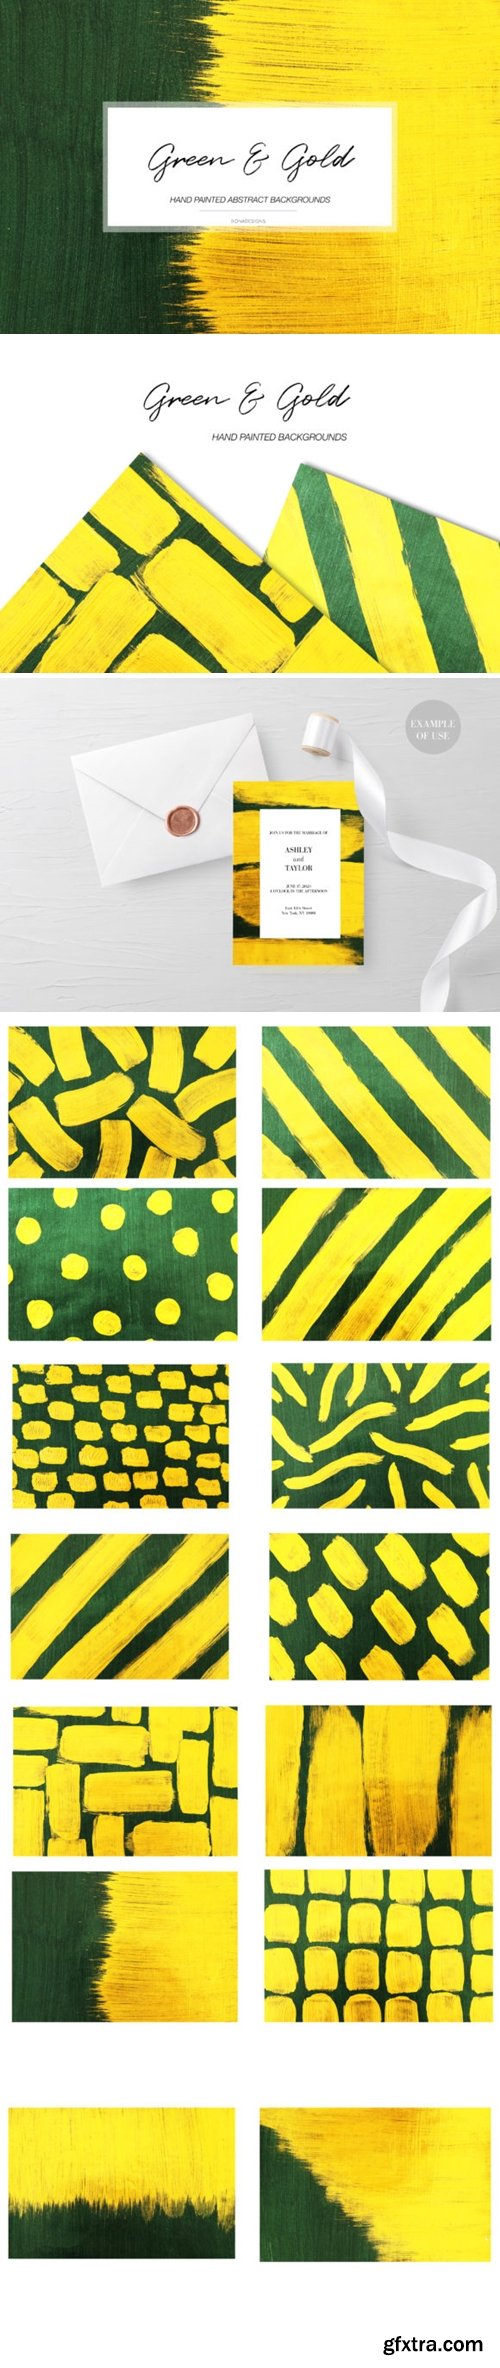 Green & Gold Abstract Backgrounds 2999599